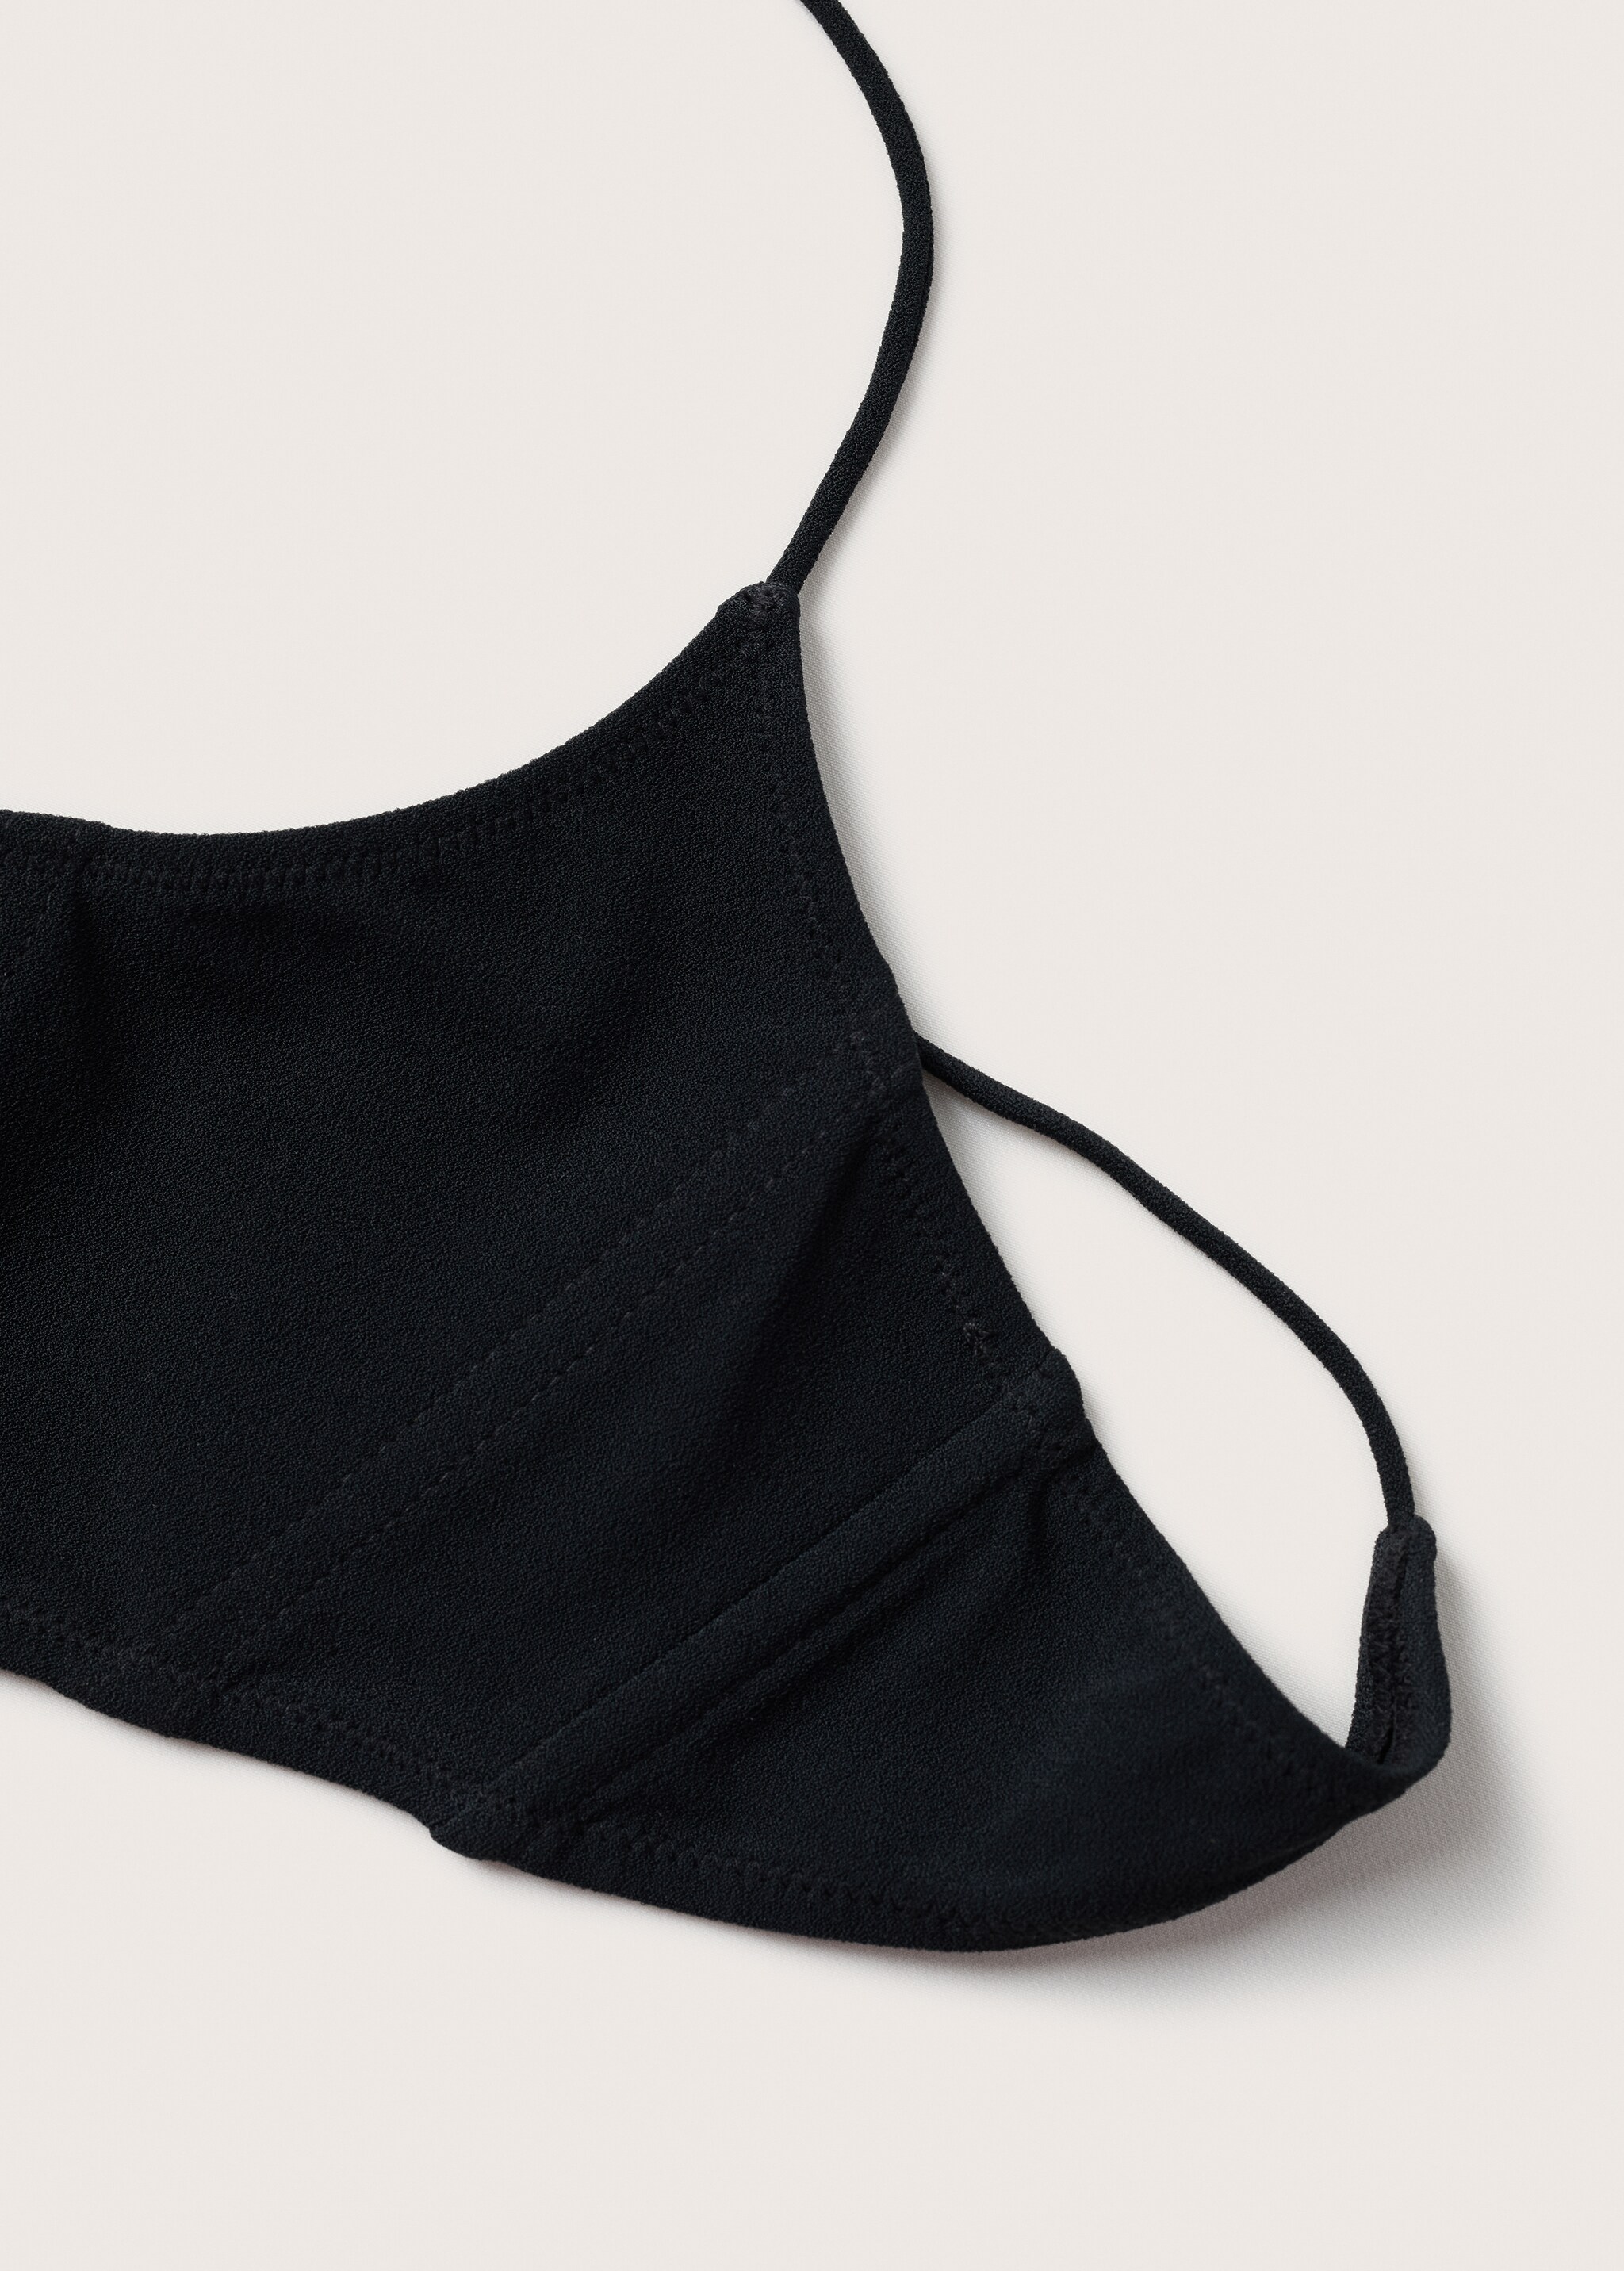 Bikini top with seams - Details of the article 8